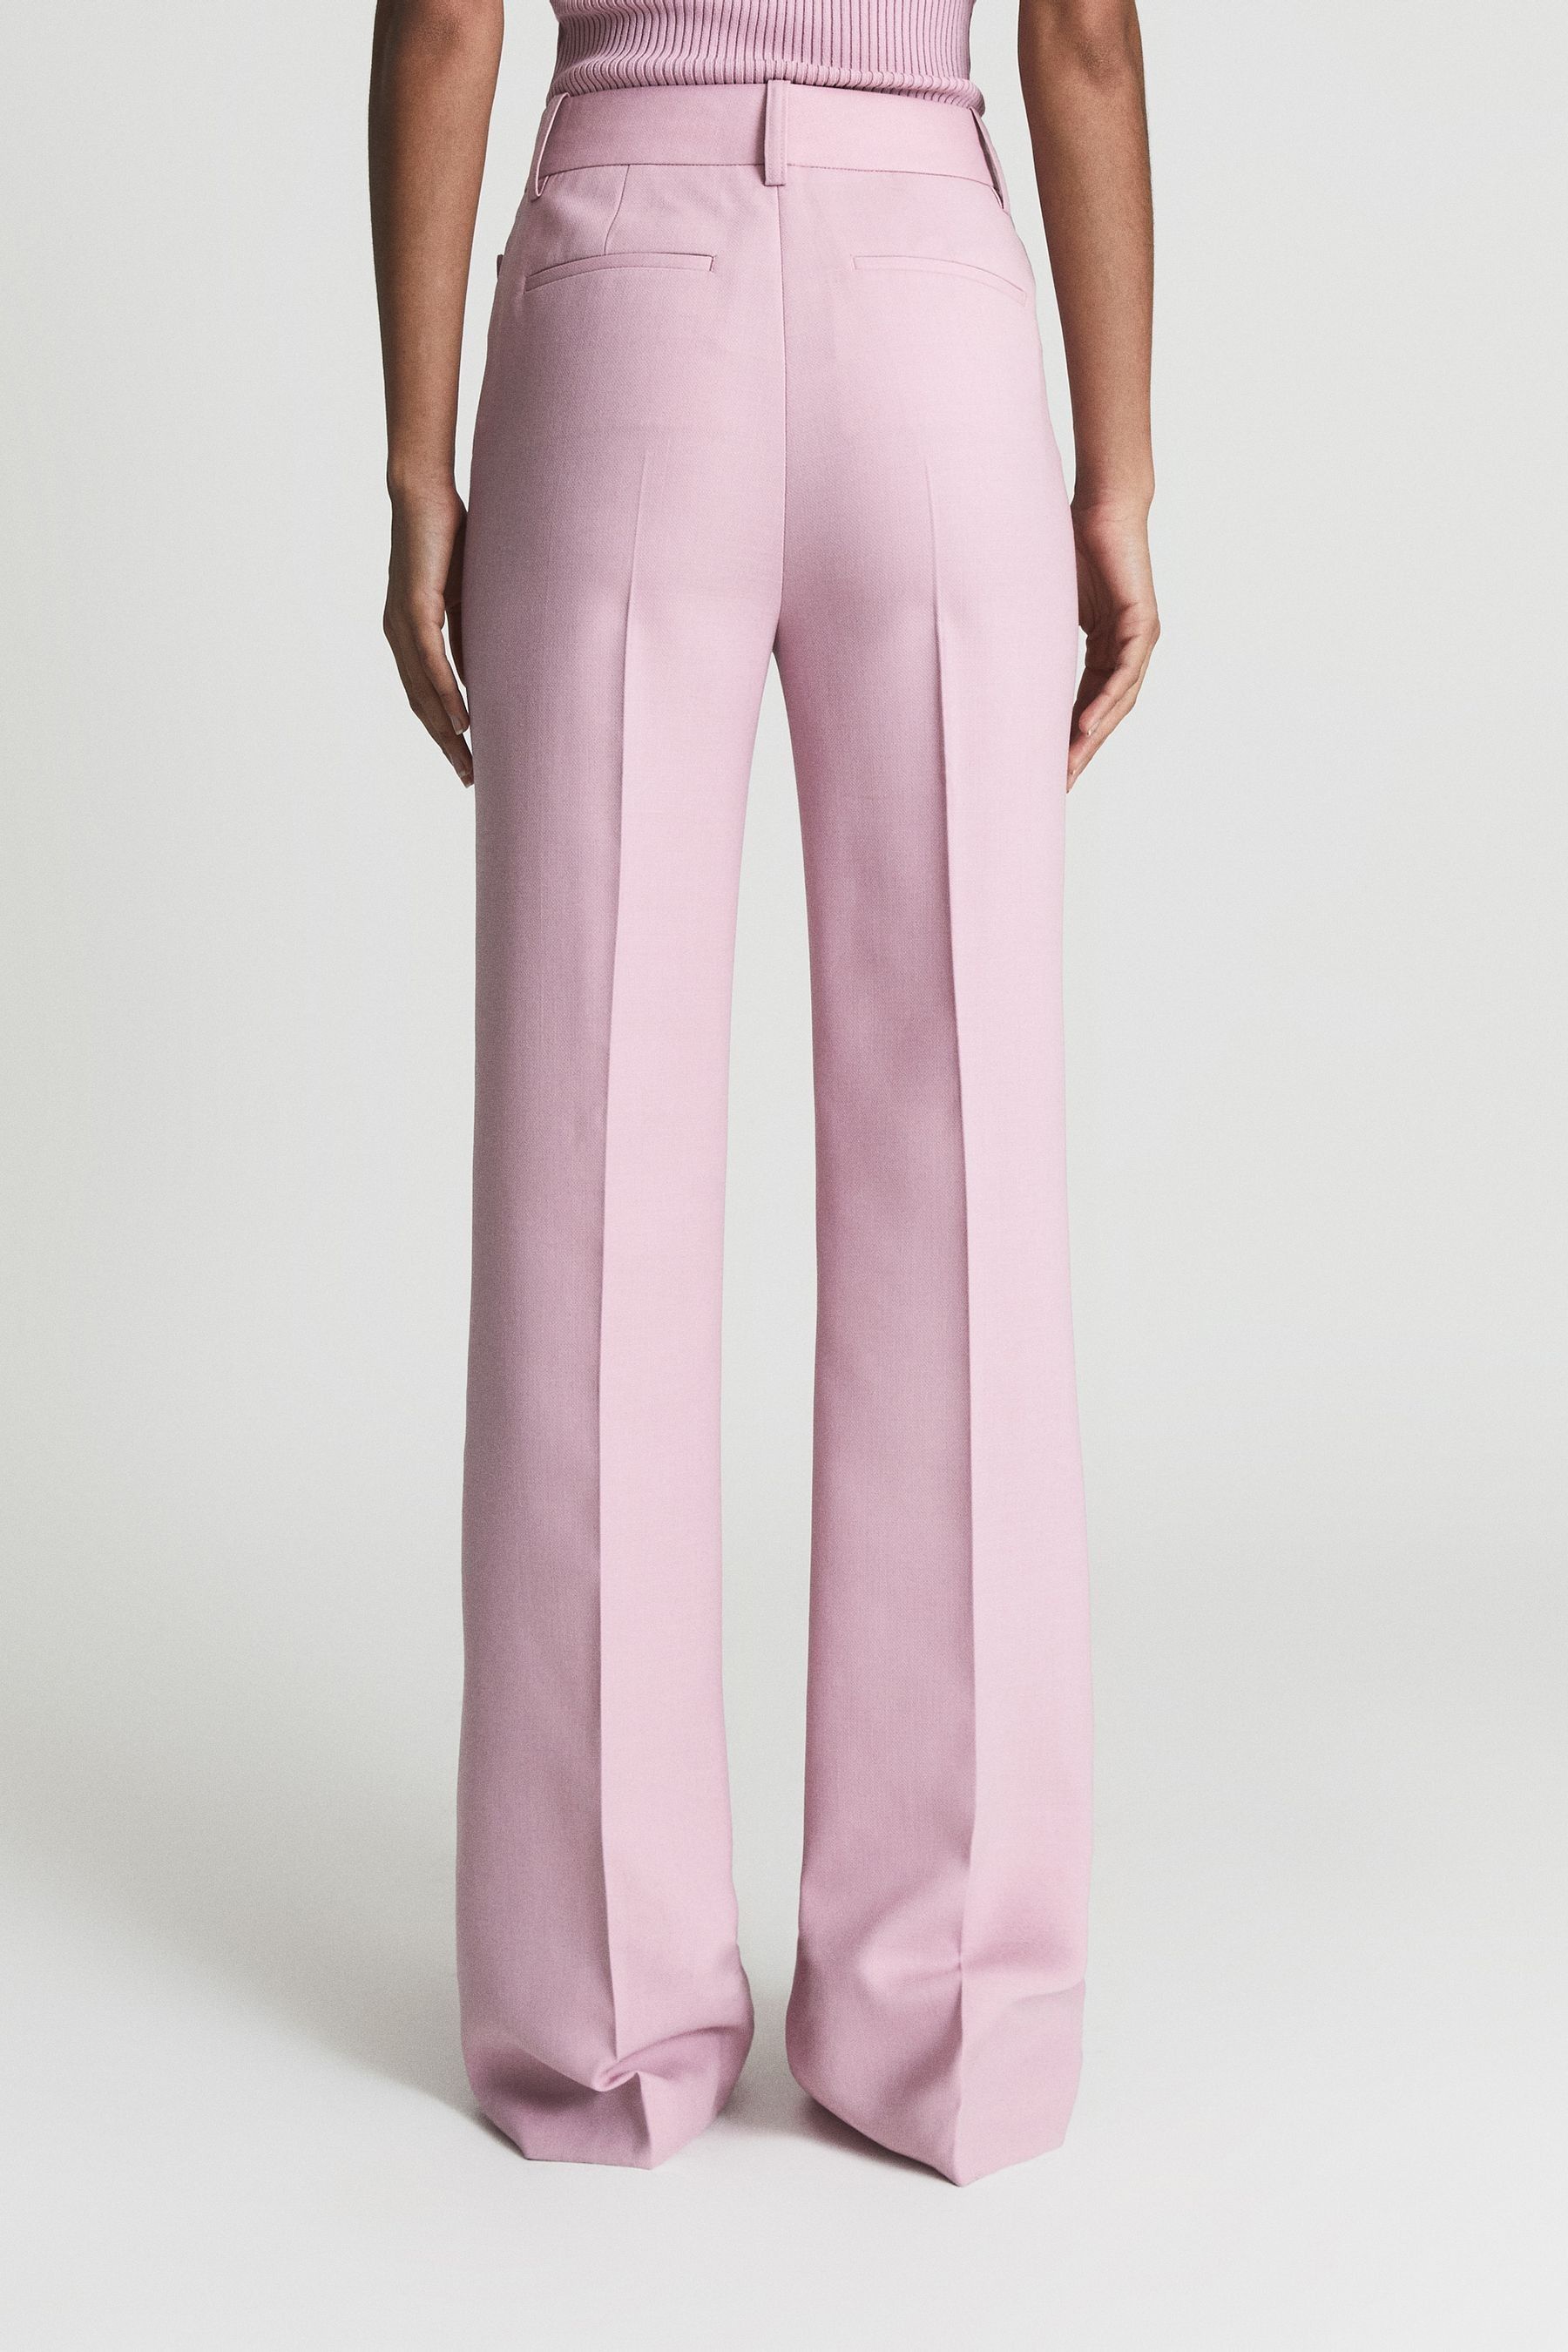 Buy Reiss Pink Aura Tailored Flare Trousers from the Next UK online shop